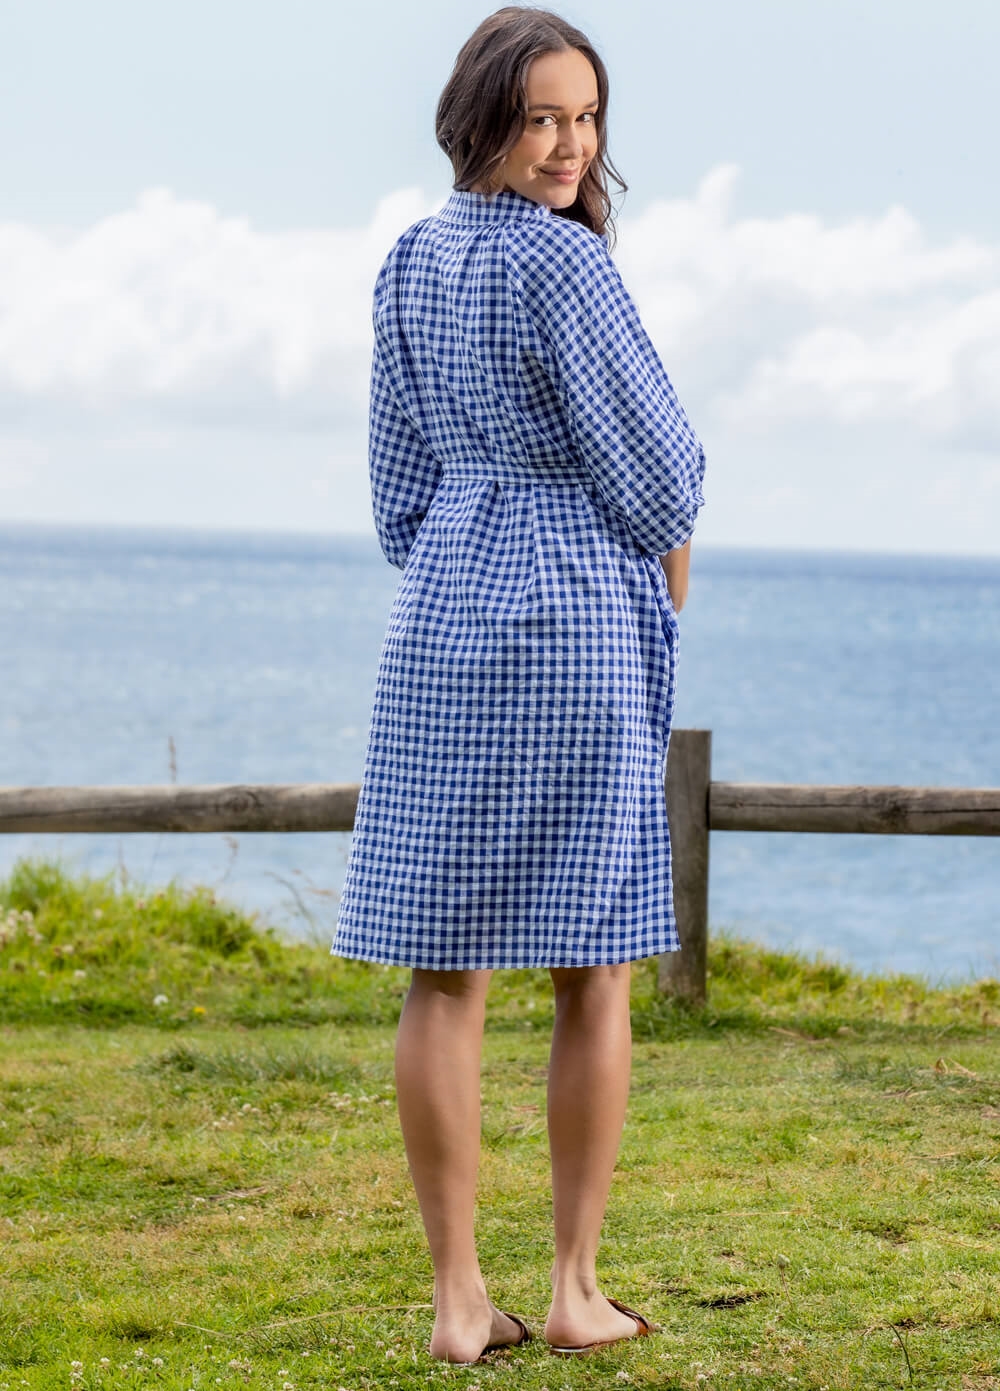 Lait & Co - Lacey-Mae Gingham Maternity Shirt Dress | Queen Bee